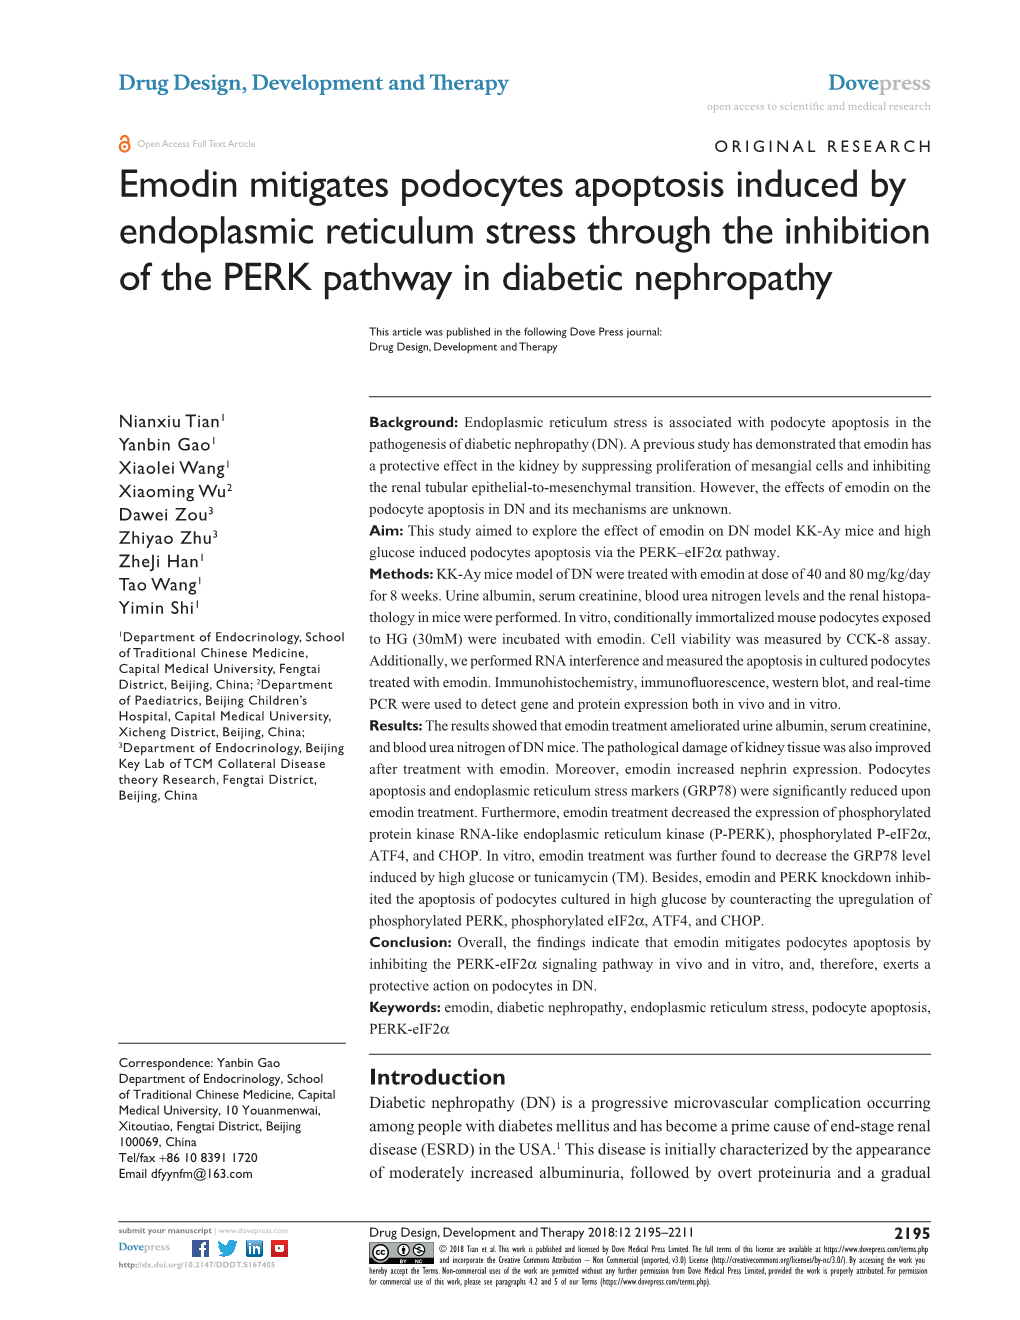 Emodin Mitigates Podocytes Apoptosis Induced by Endoplasmic Reticulum Stress Through the Inhibition of the PERK Pathway in Diabetic Nephropathy